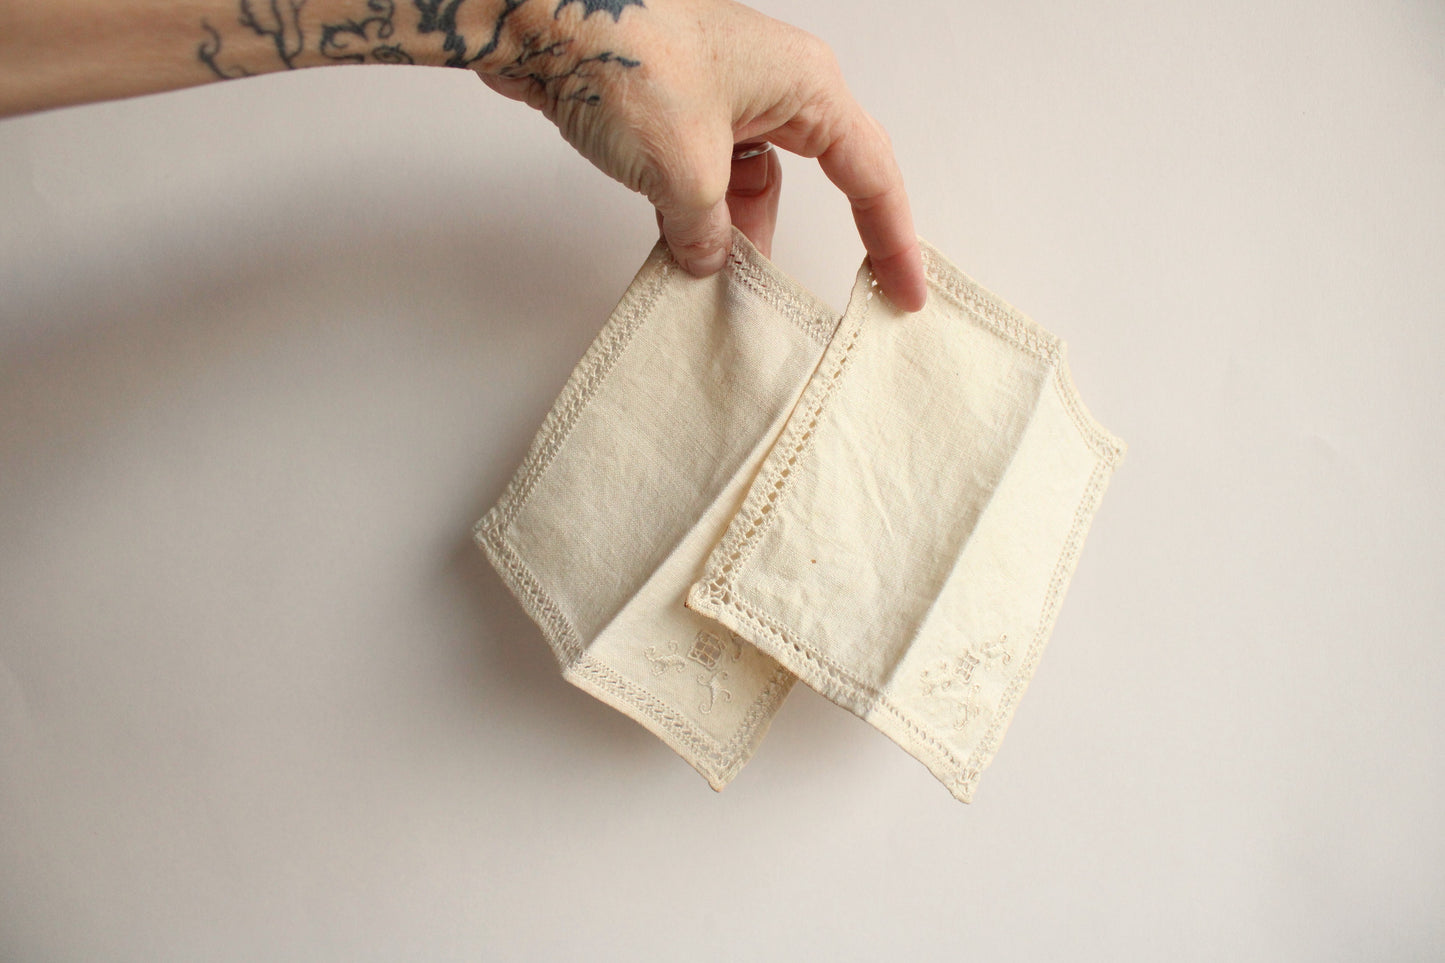 Set of Two Hand Plant Dyed Vintage Napkins in Dusty Ivory